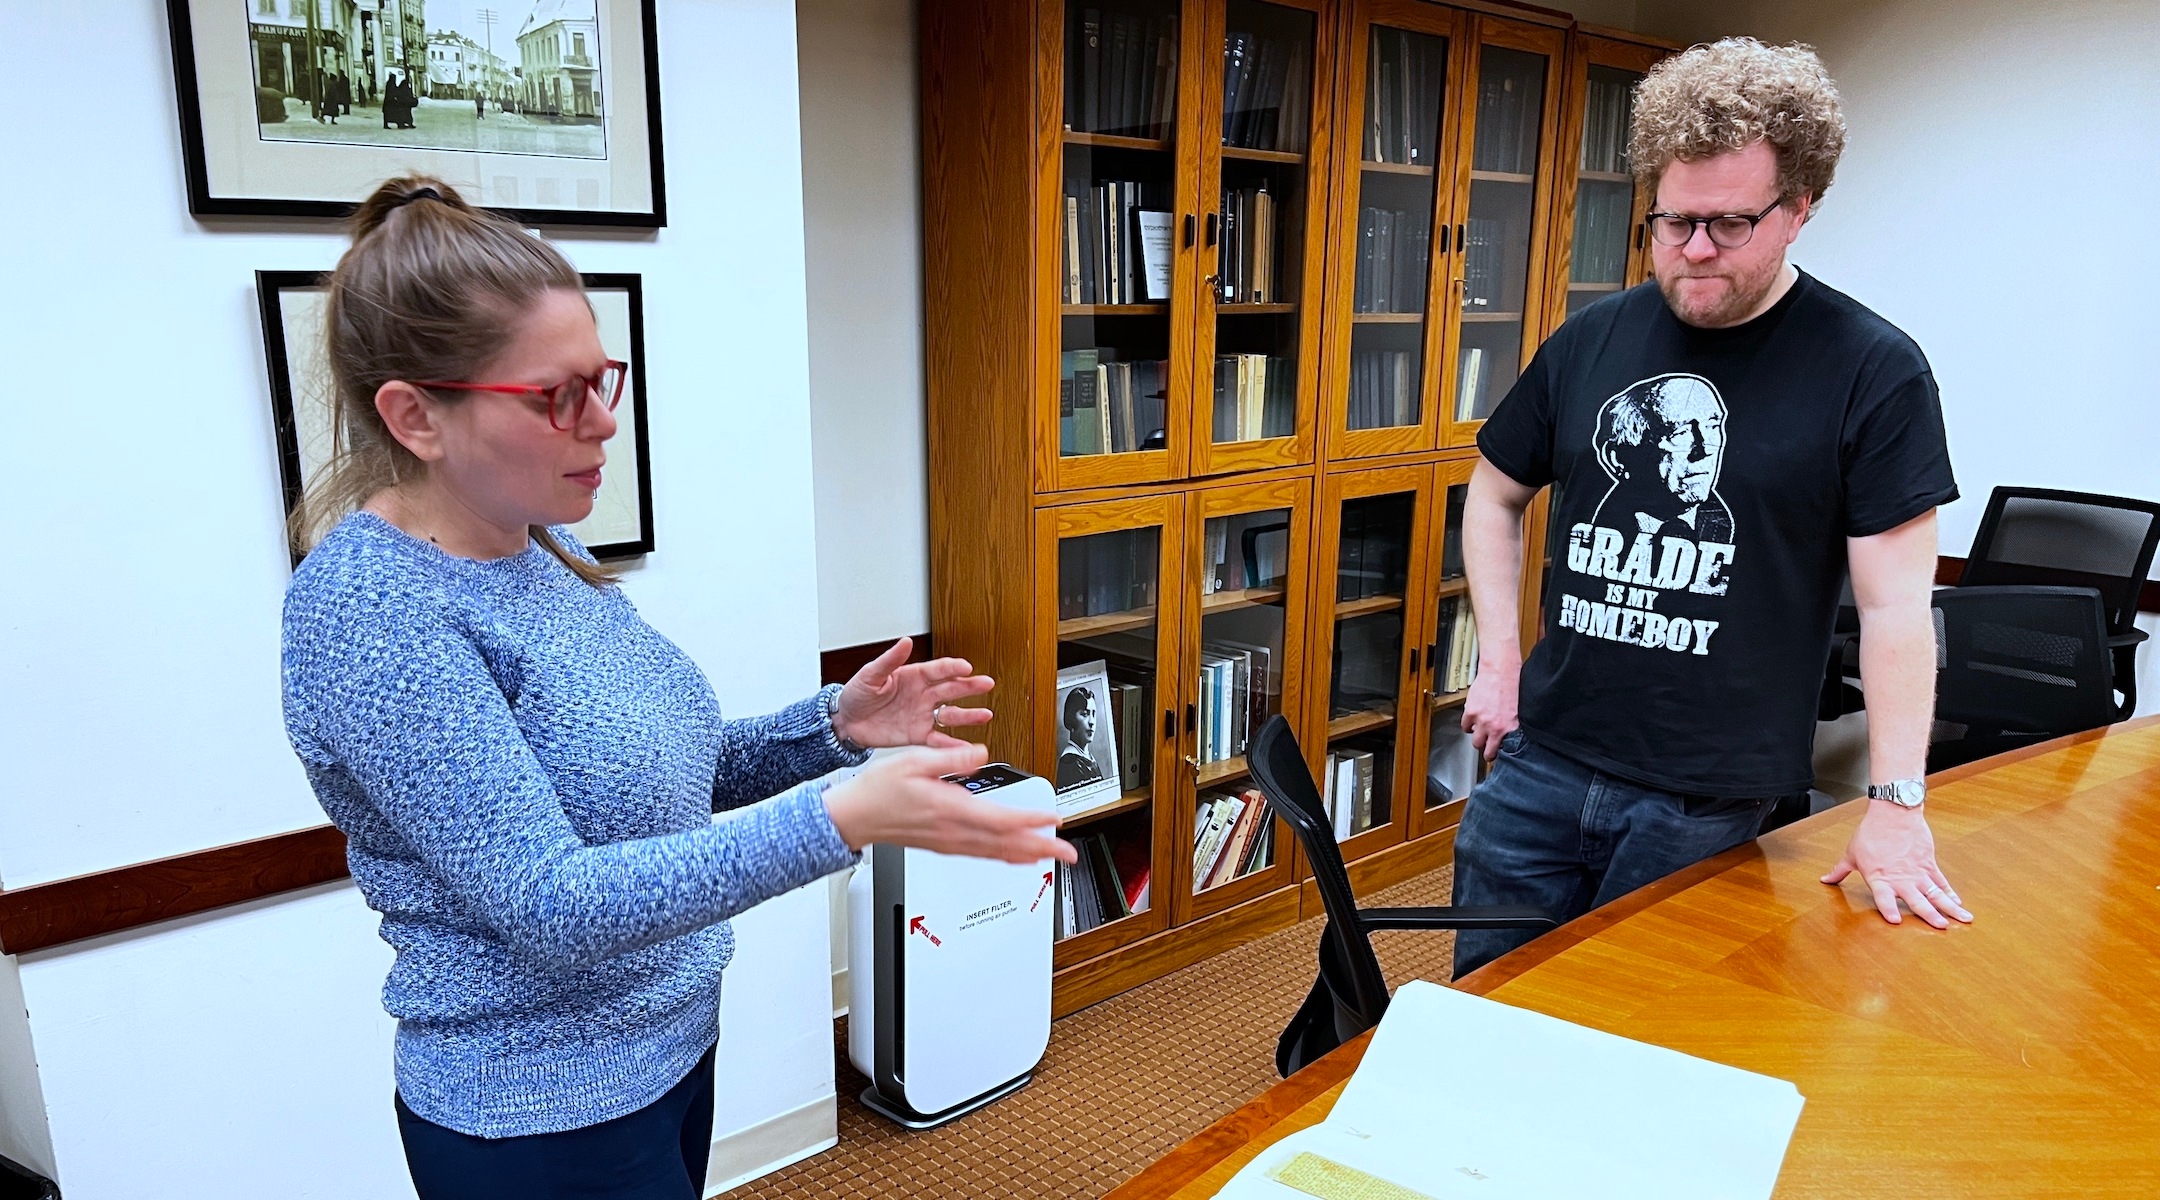 Stefanie Halpern, director of the YIVO archives, and novelist Max Gross discuss a thick file containing news clippings relating to the late Yiddish novelist Chaim Grade at YIVO’s Manhattan offices, Feb. 2, 2023. (New York Jewish Week)